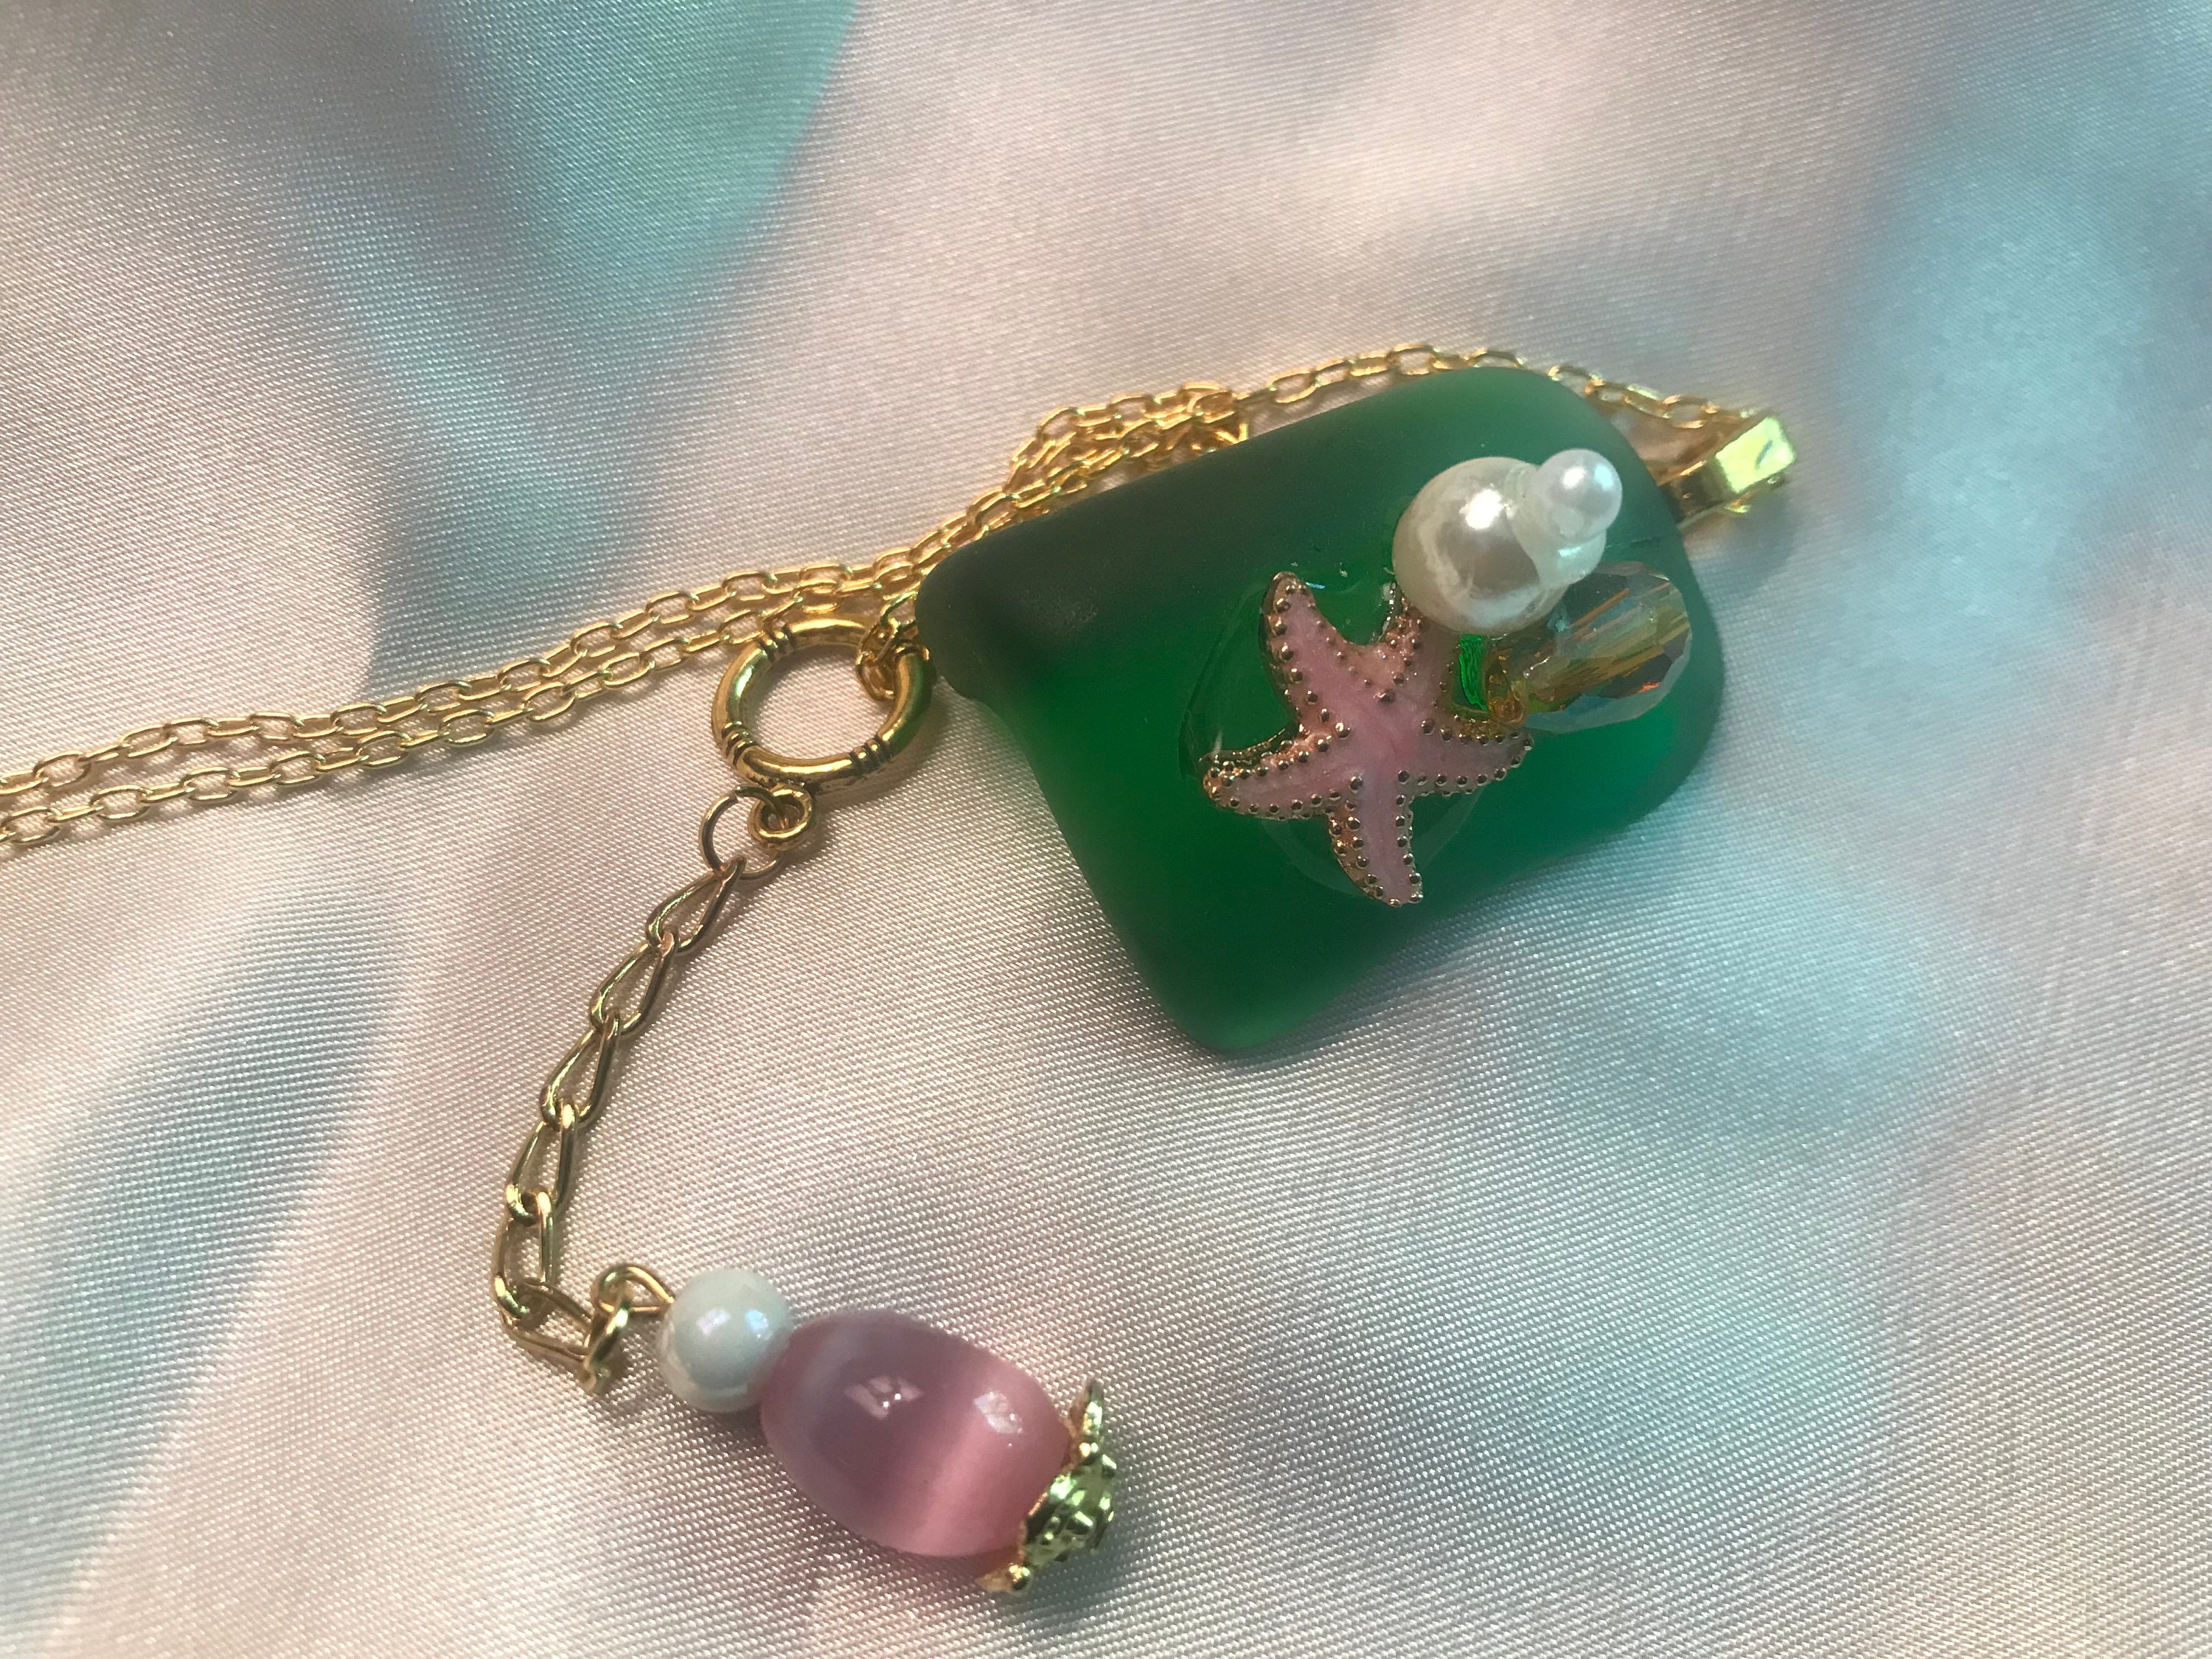 EMERALD SEA GLASS PENDANT NECKLACE WITH CHARMS AND GOLD TONE CABLE CHAIN